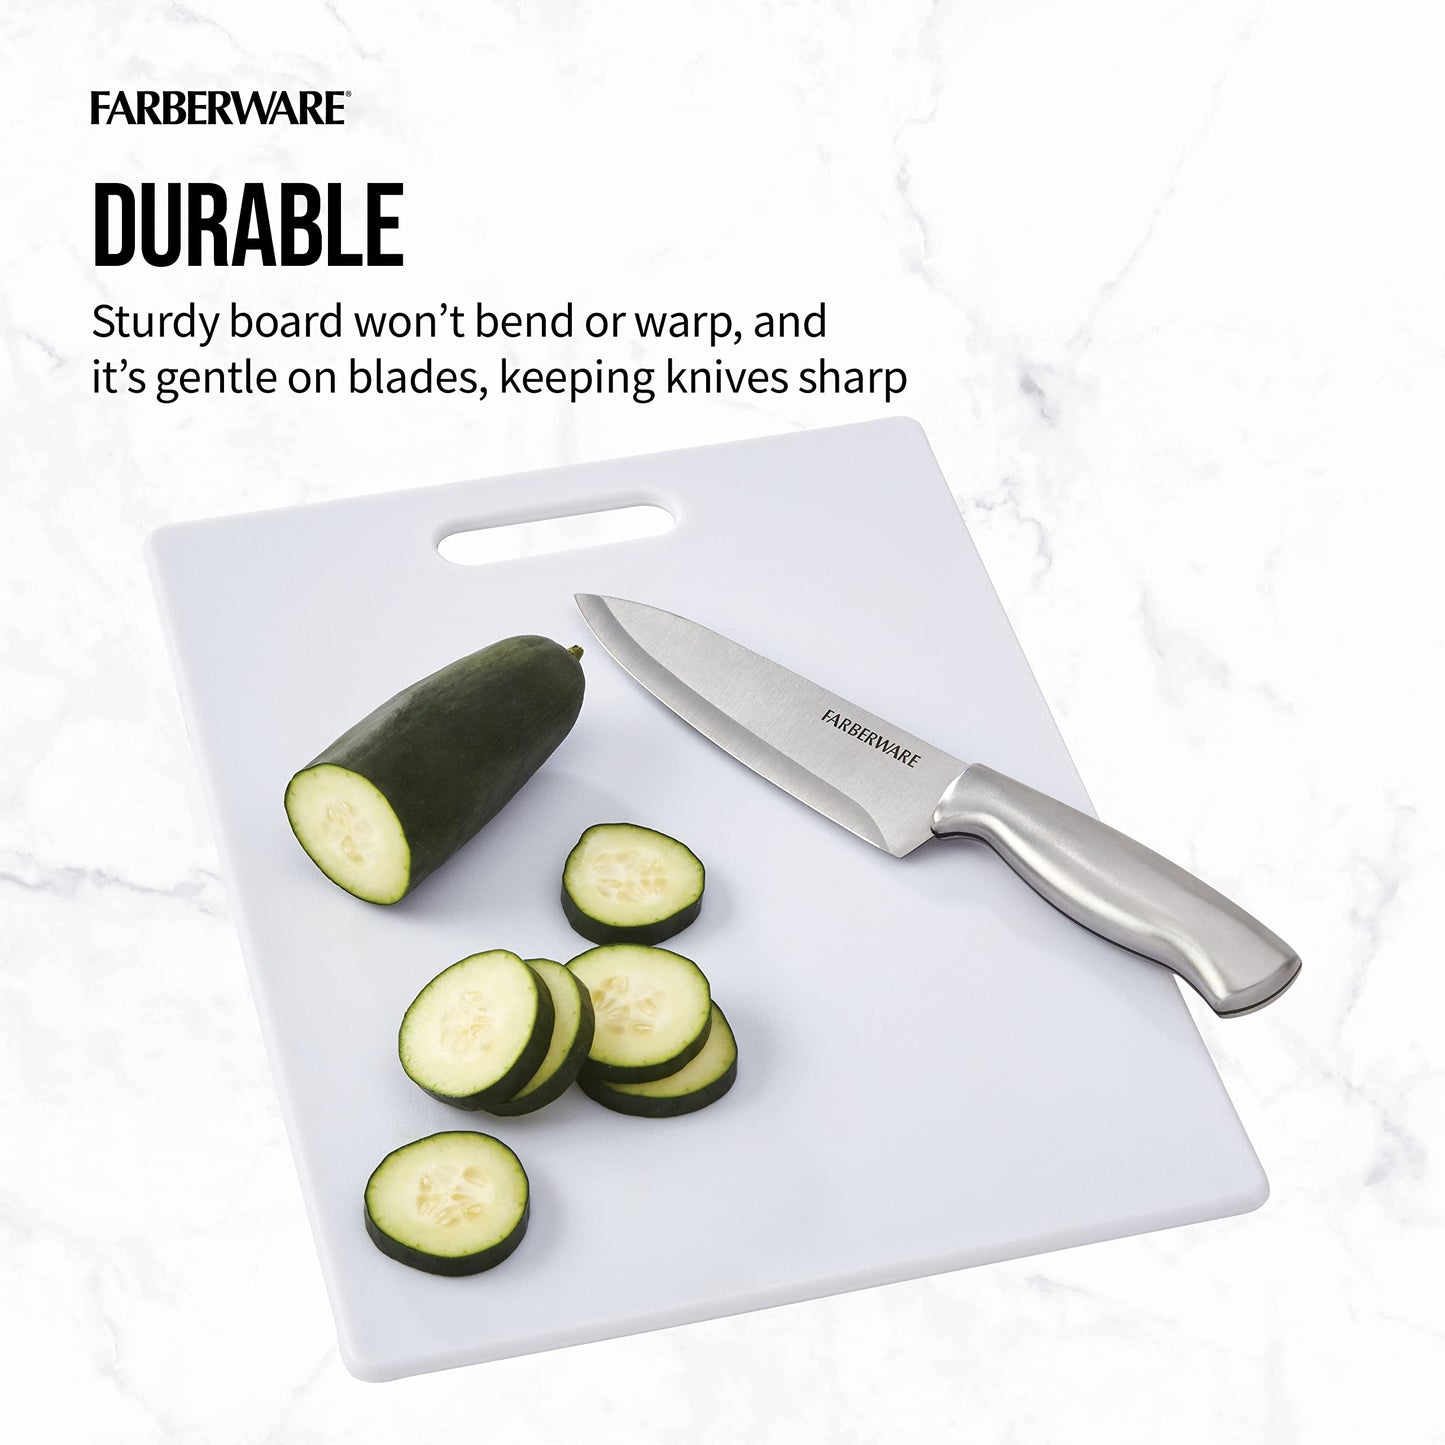 Farberware Large Cutting Board, Dishwasher- Safe Plastic Chopping Board for Kitchen with Easy Grip Handle, 11-inch by 14-inch, White